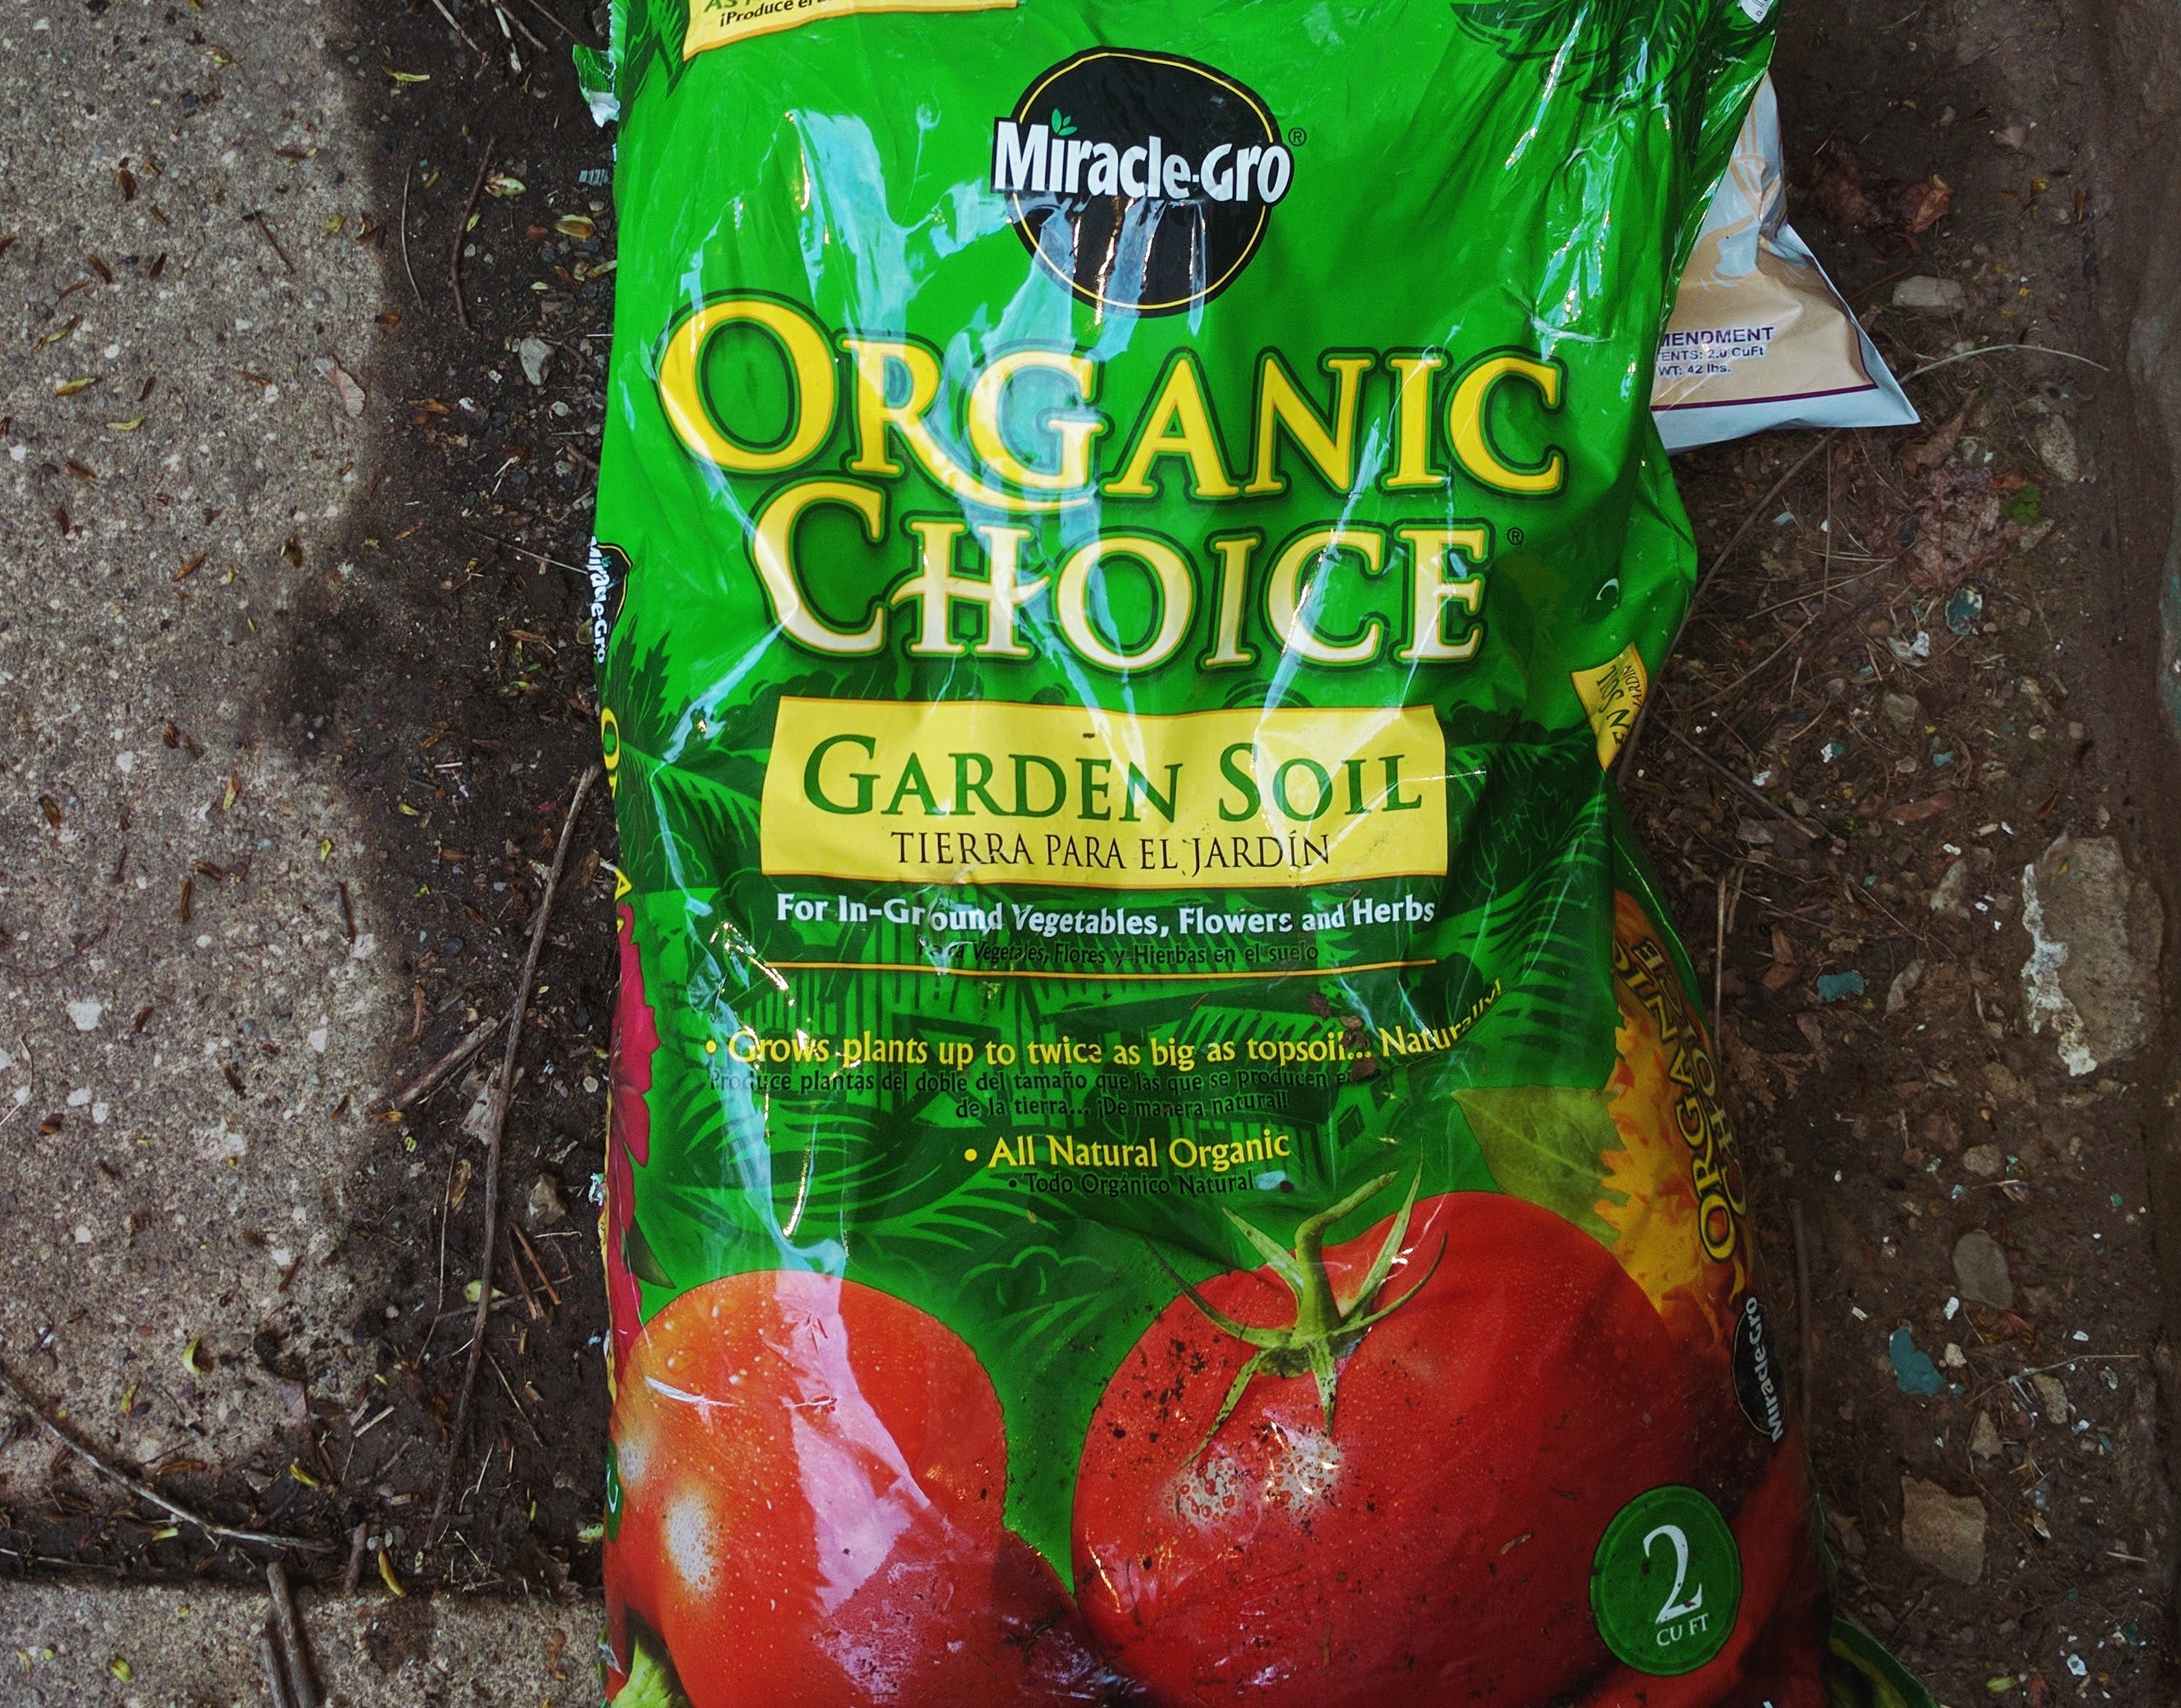 What You May Find In A Bag Of Organic Choice Garden Soil From Miracle Gro By Anne Marie Blankenship Medium